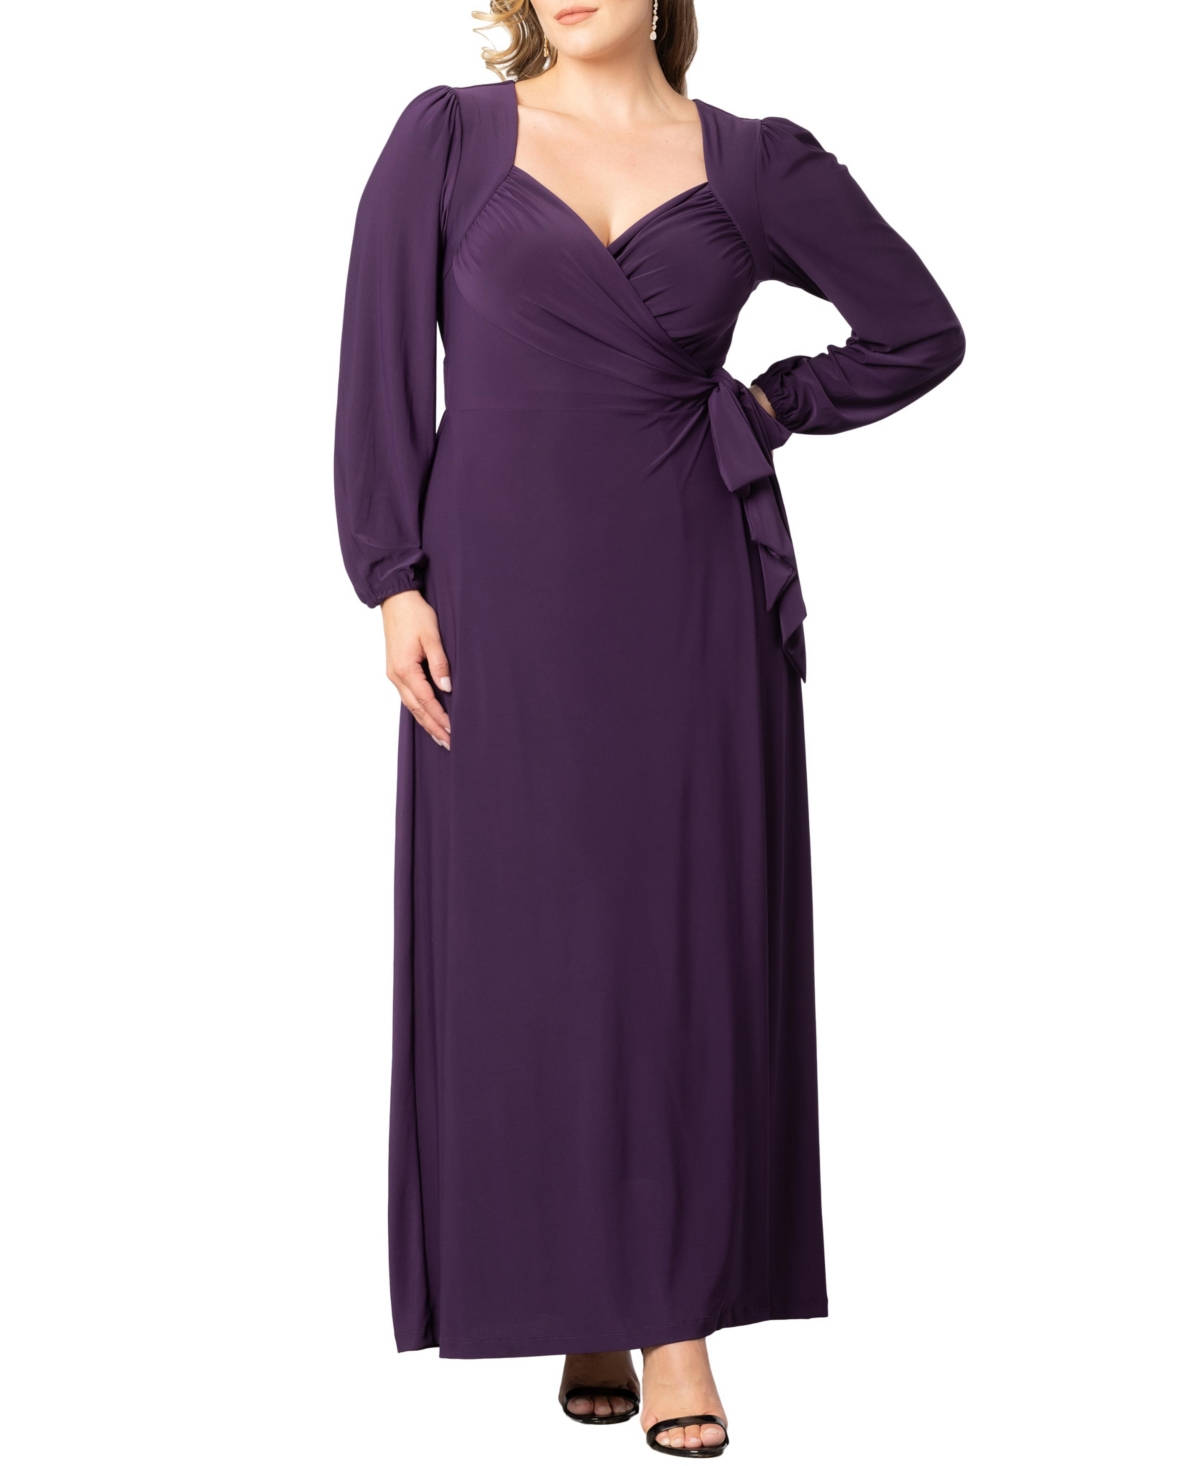 Women's Plus Size Modern Muse Long Sleeve Wrap Gown - Imperial plum